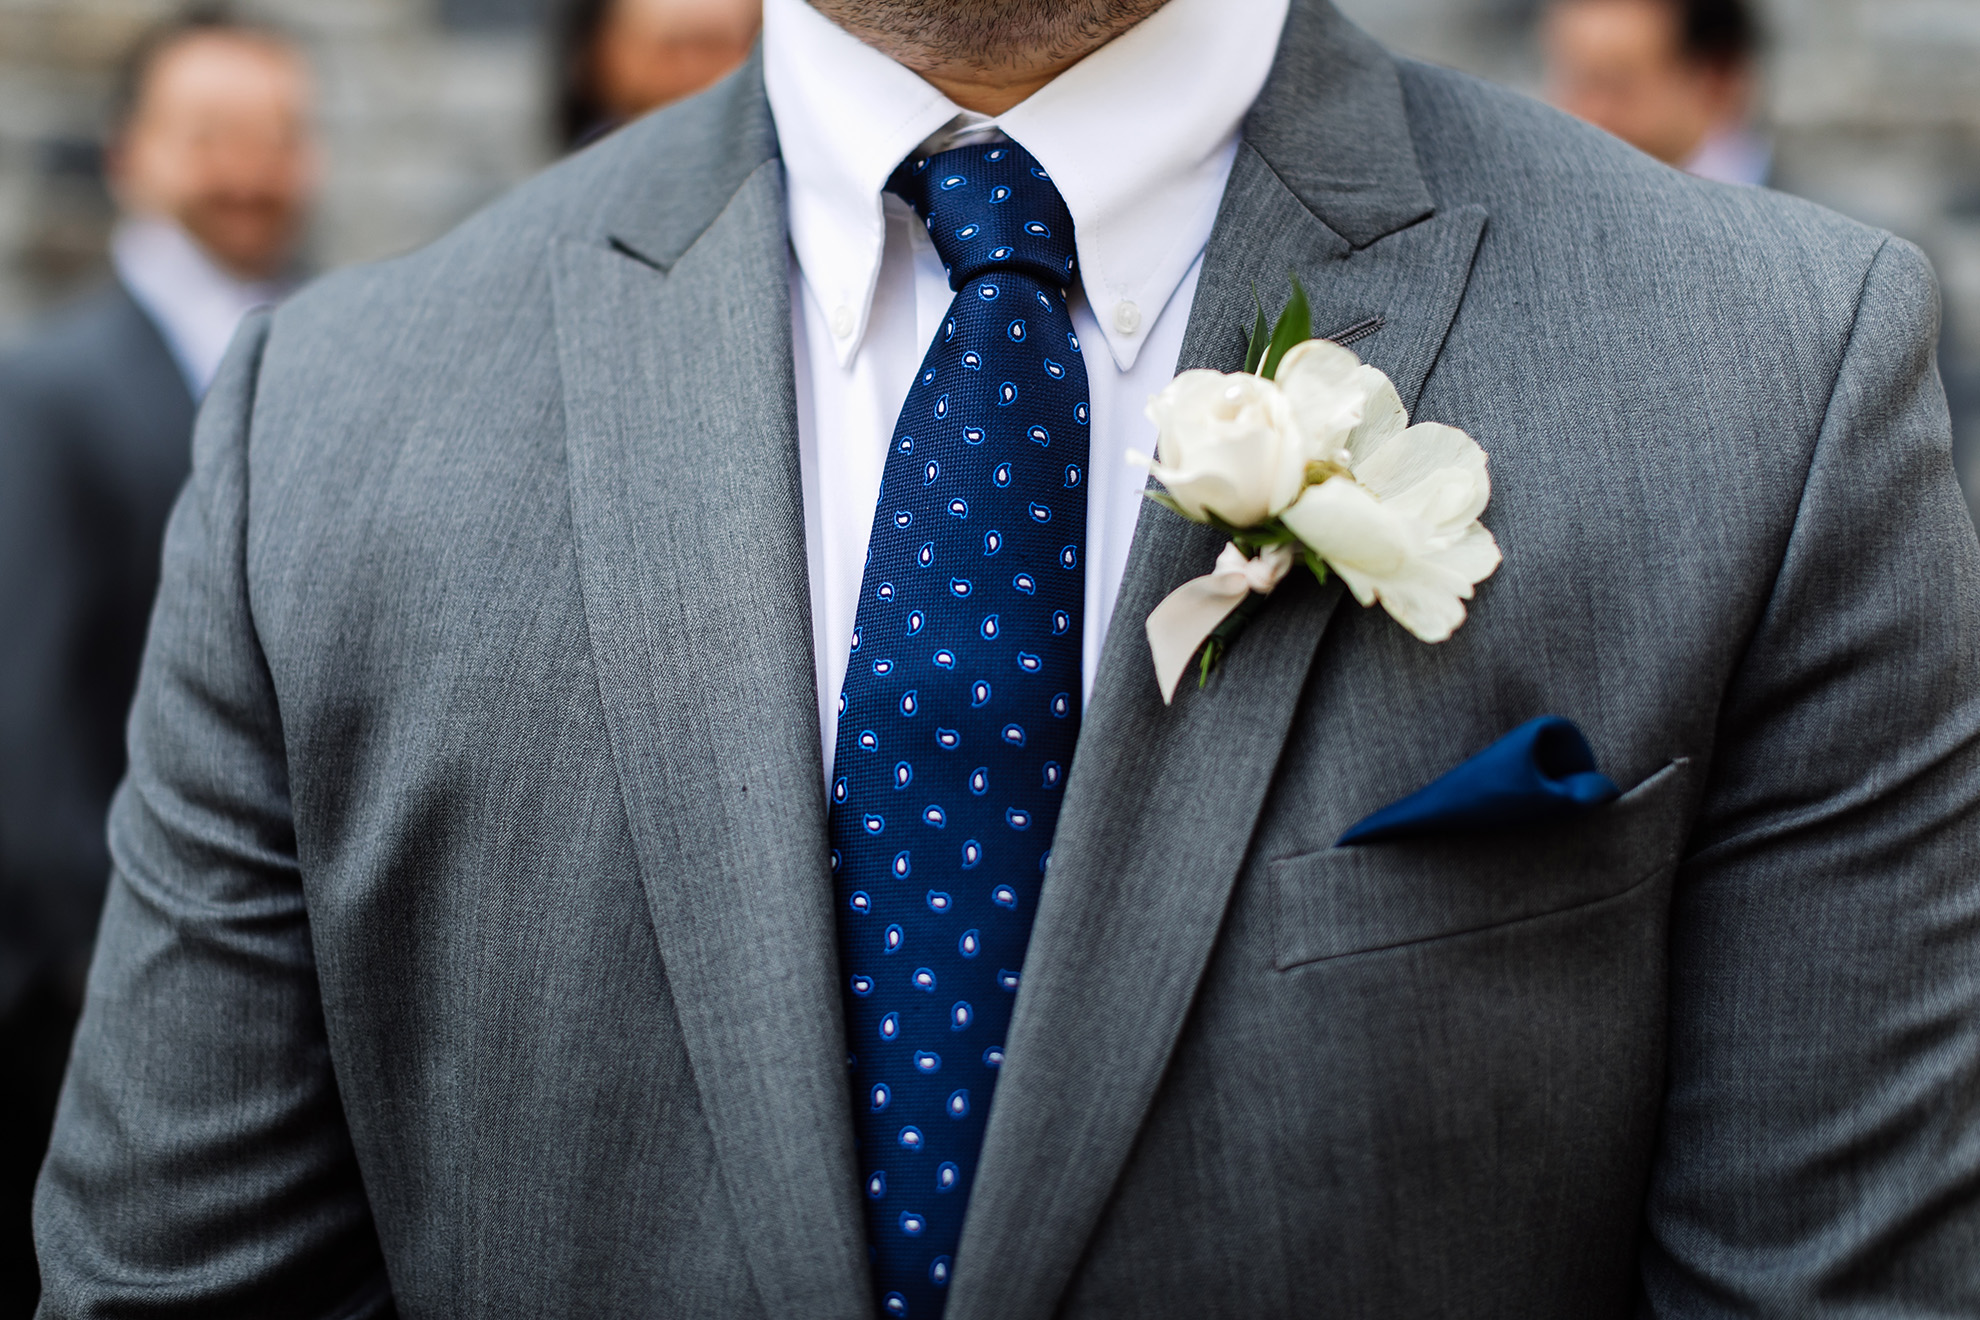 Groom with Grey suit, blue tie, boutineer and blue handkerchief.  Photo by Artistic Imagery